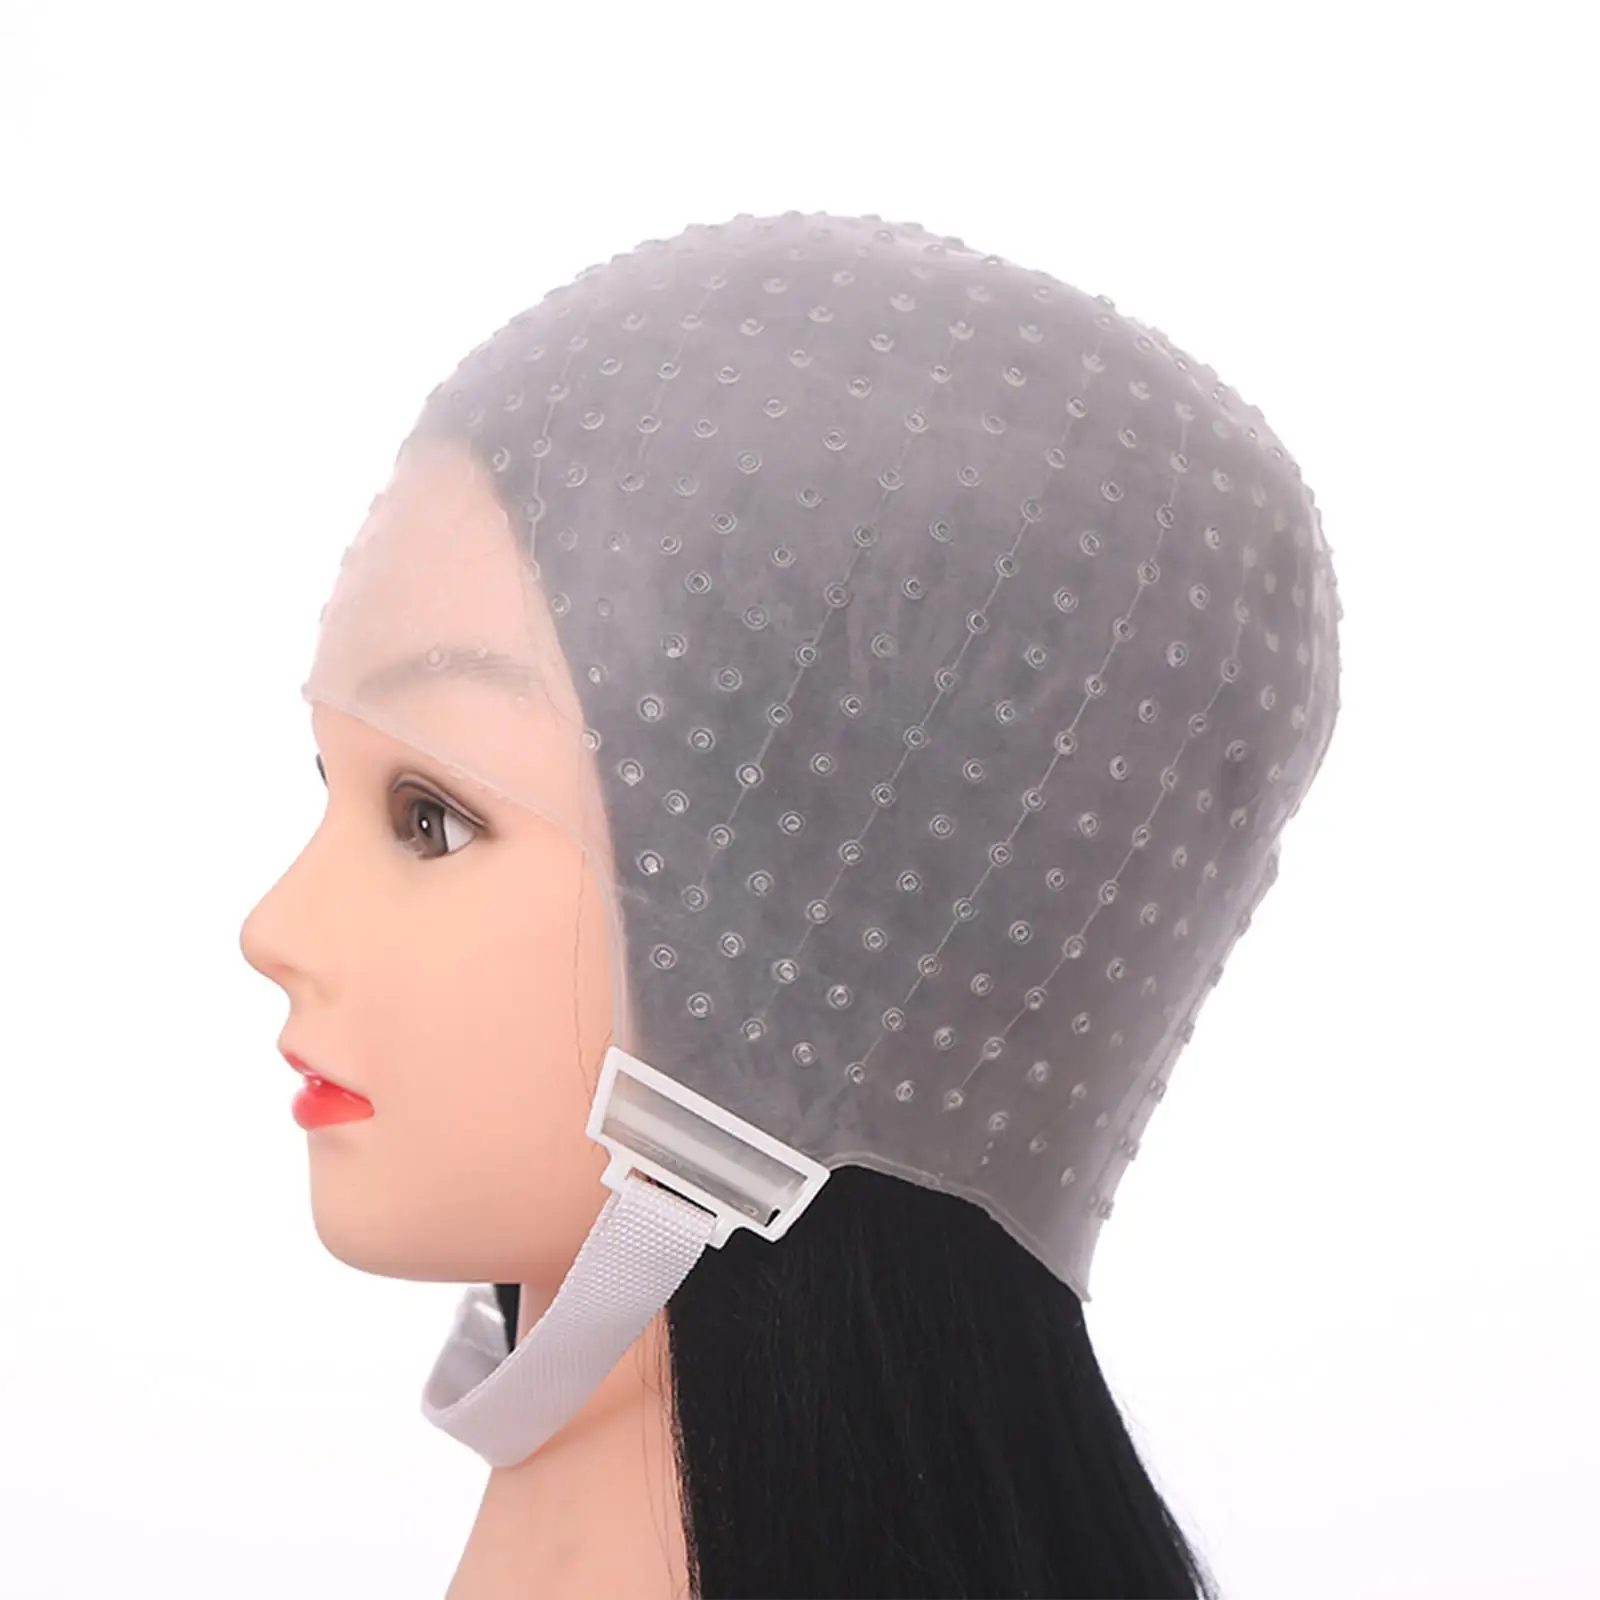 Reusable Silicone Hair Highlighting Hat, Adjustable Professional with Hair Dye Hat for Barber Hair Styling Tools  